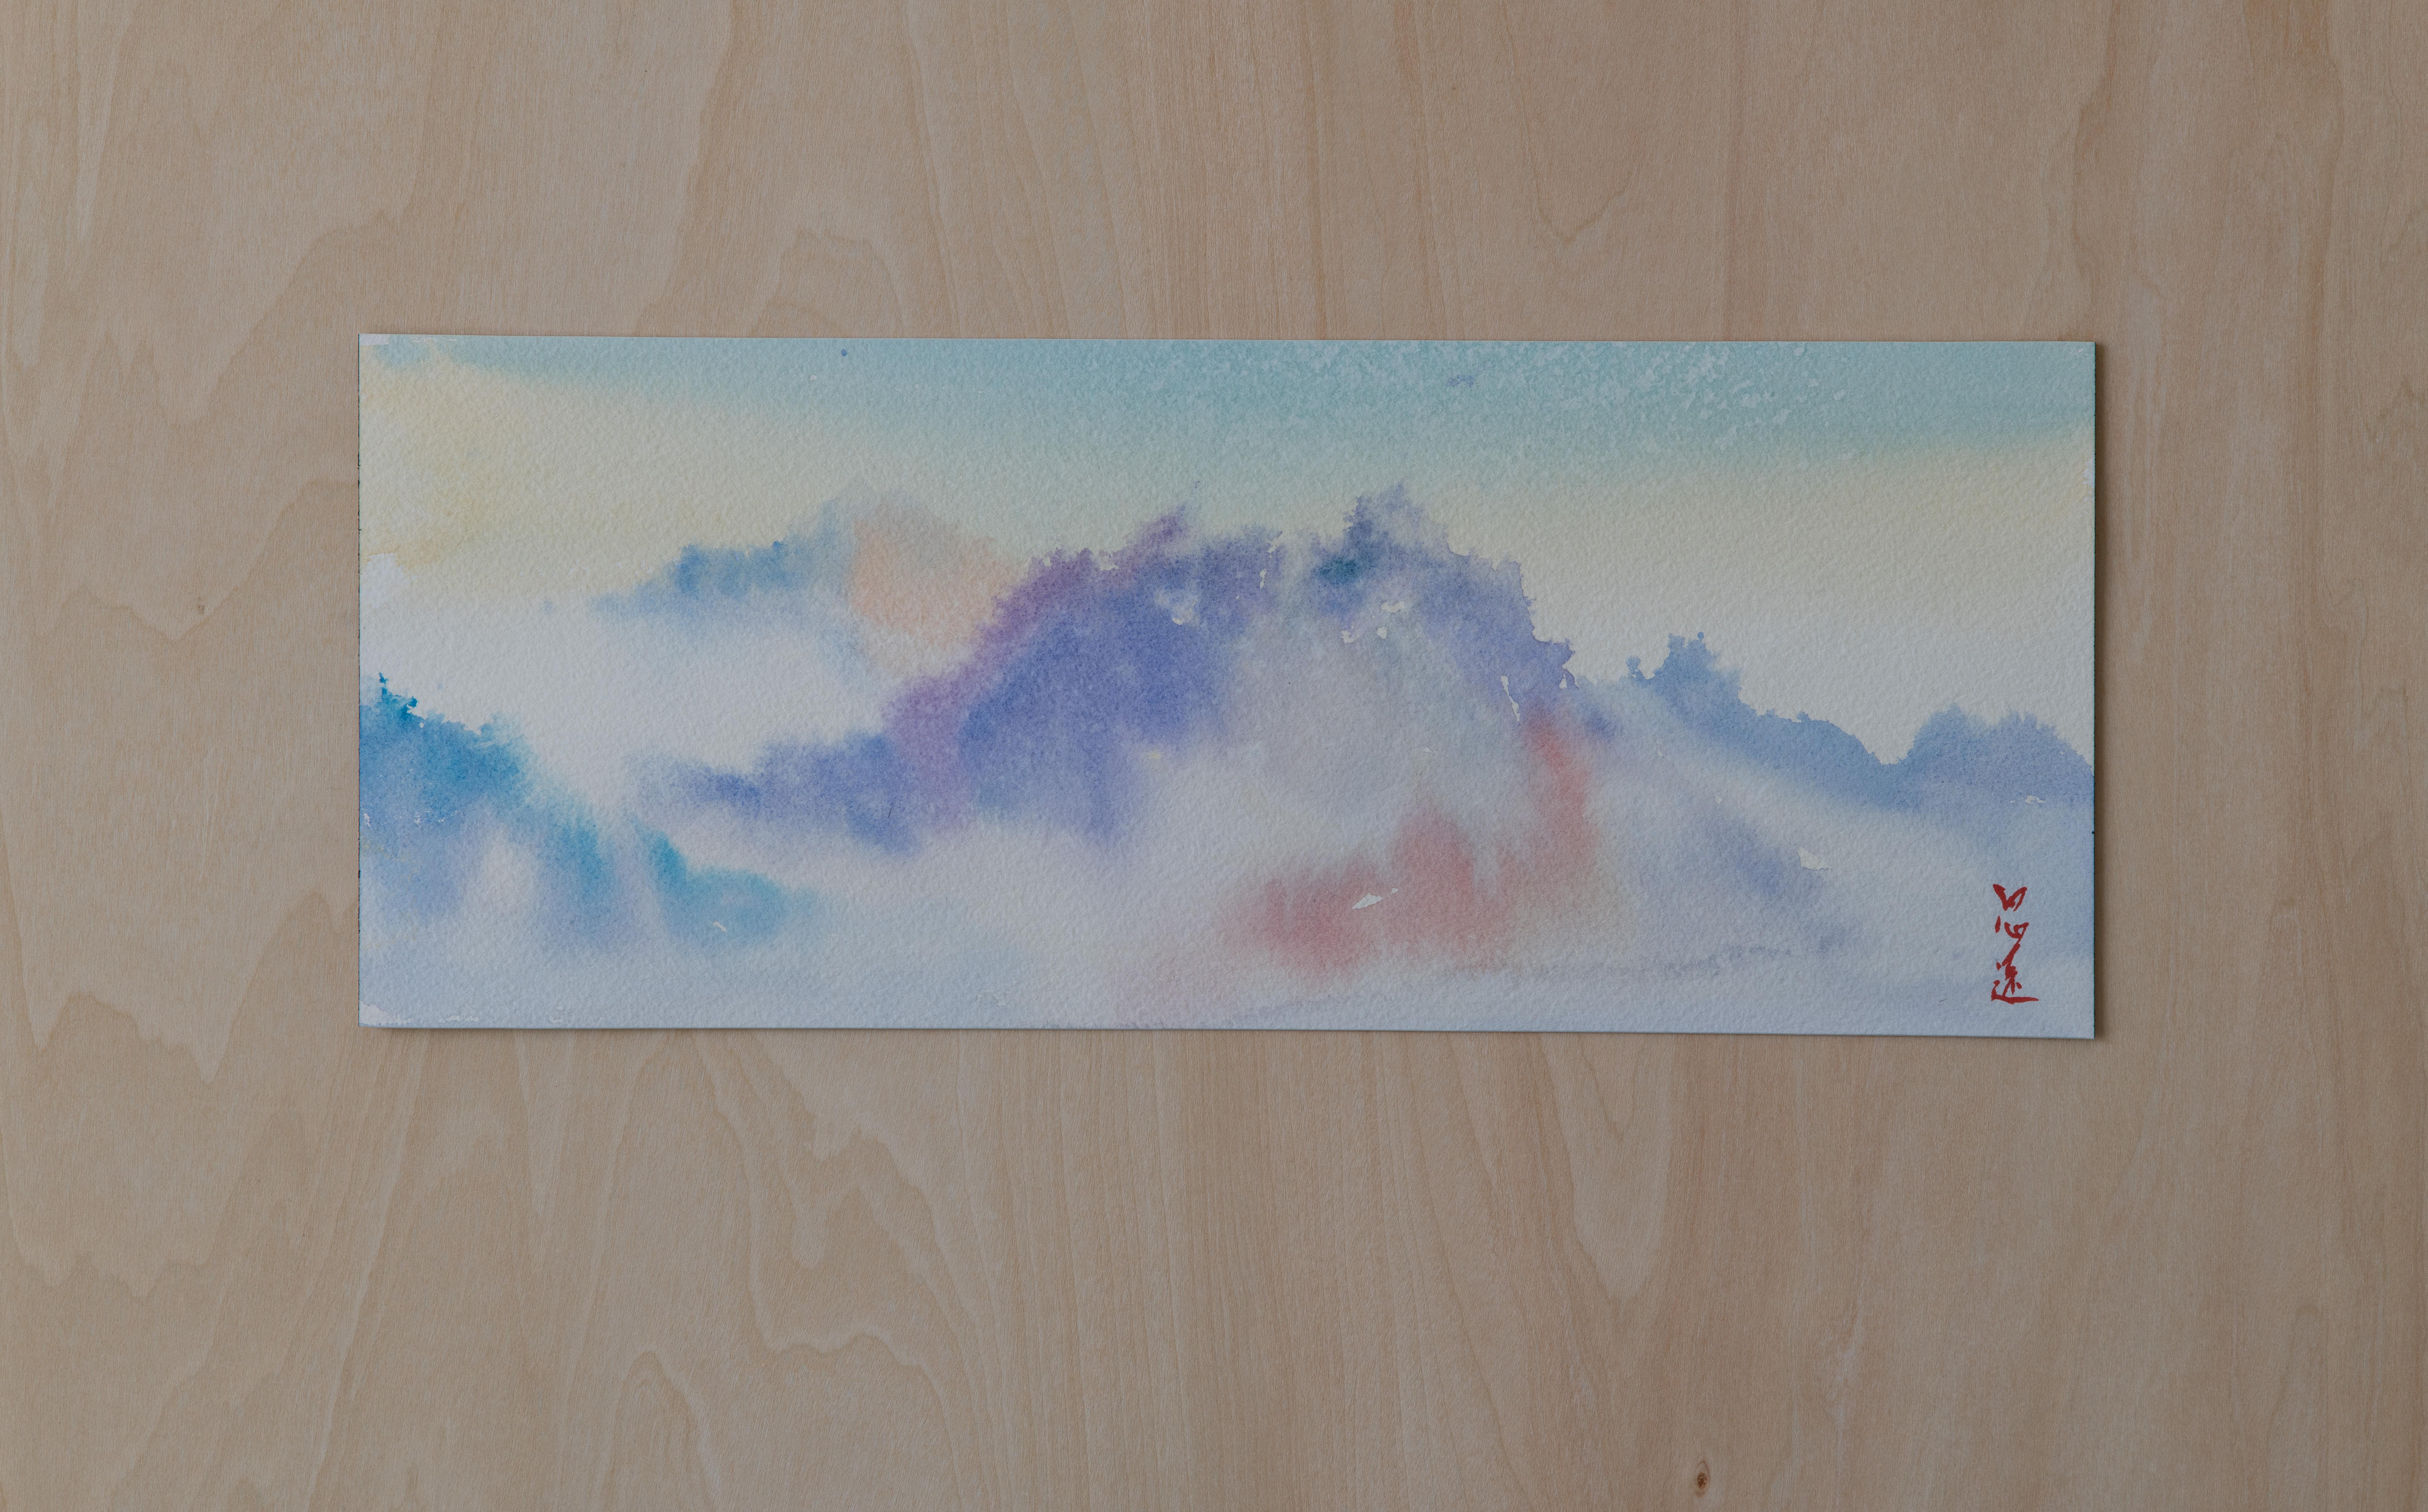 <p>Artist Comments<br>Artist Siyuan Ma shares an ethereal outlook of a snowy mountain range with an abstract approach. After the rain, sunlight shines on the water droplets in the air. Rainbow-like colors surface from the snowscape through